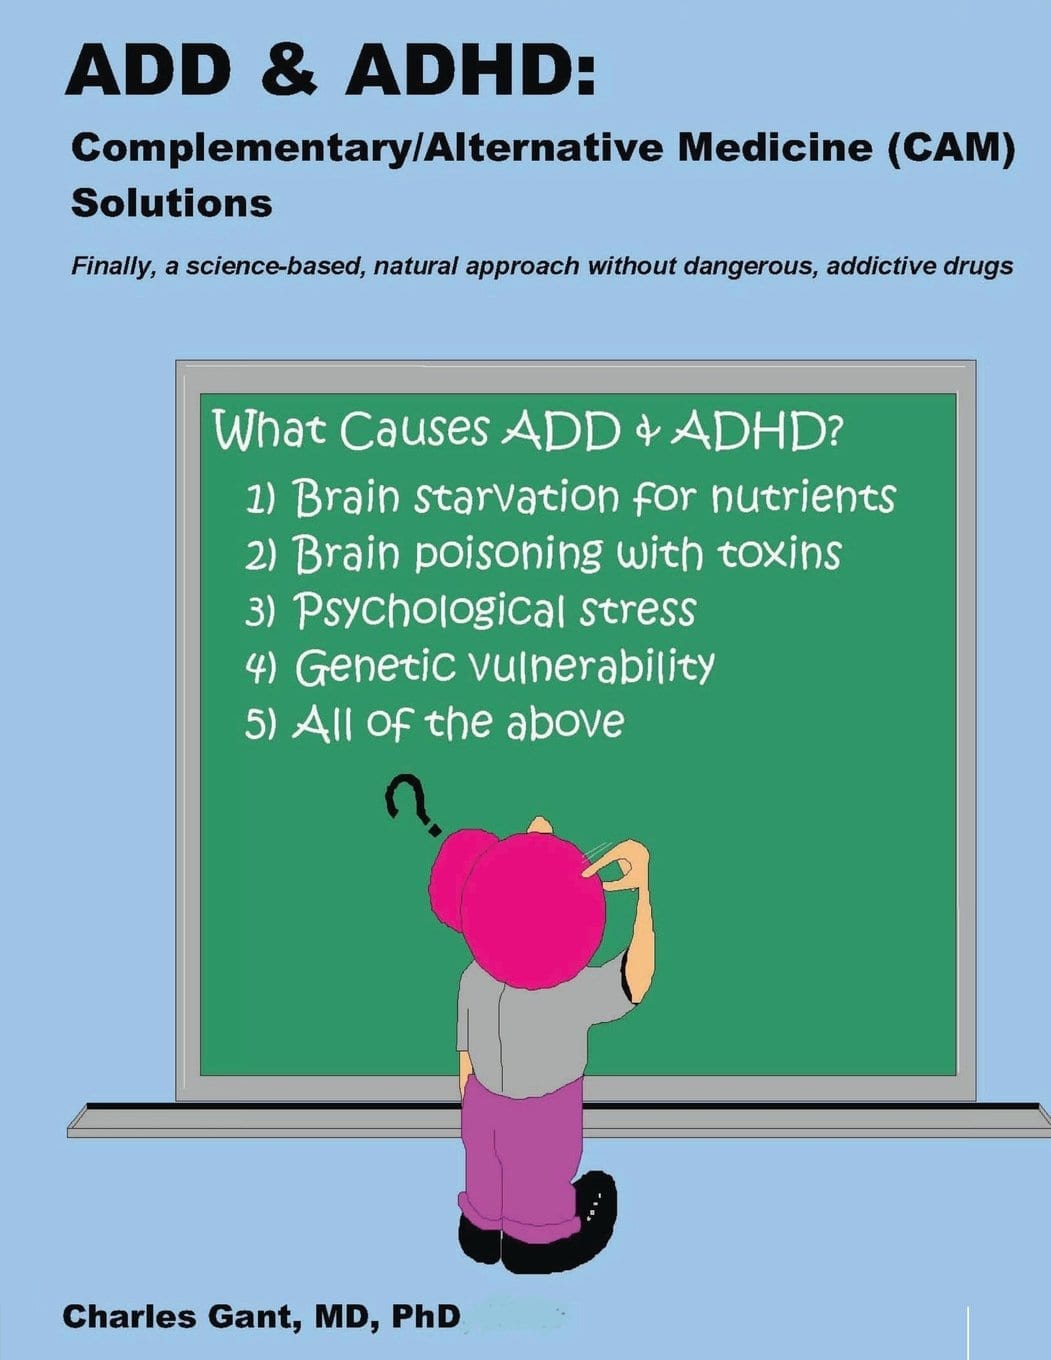 ADHD - Attention Deficit Hyperactivity disorder